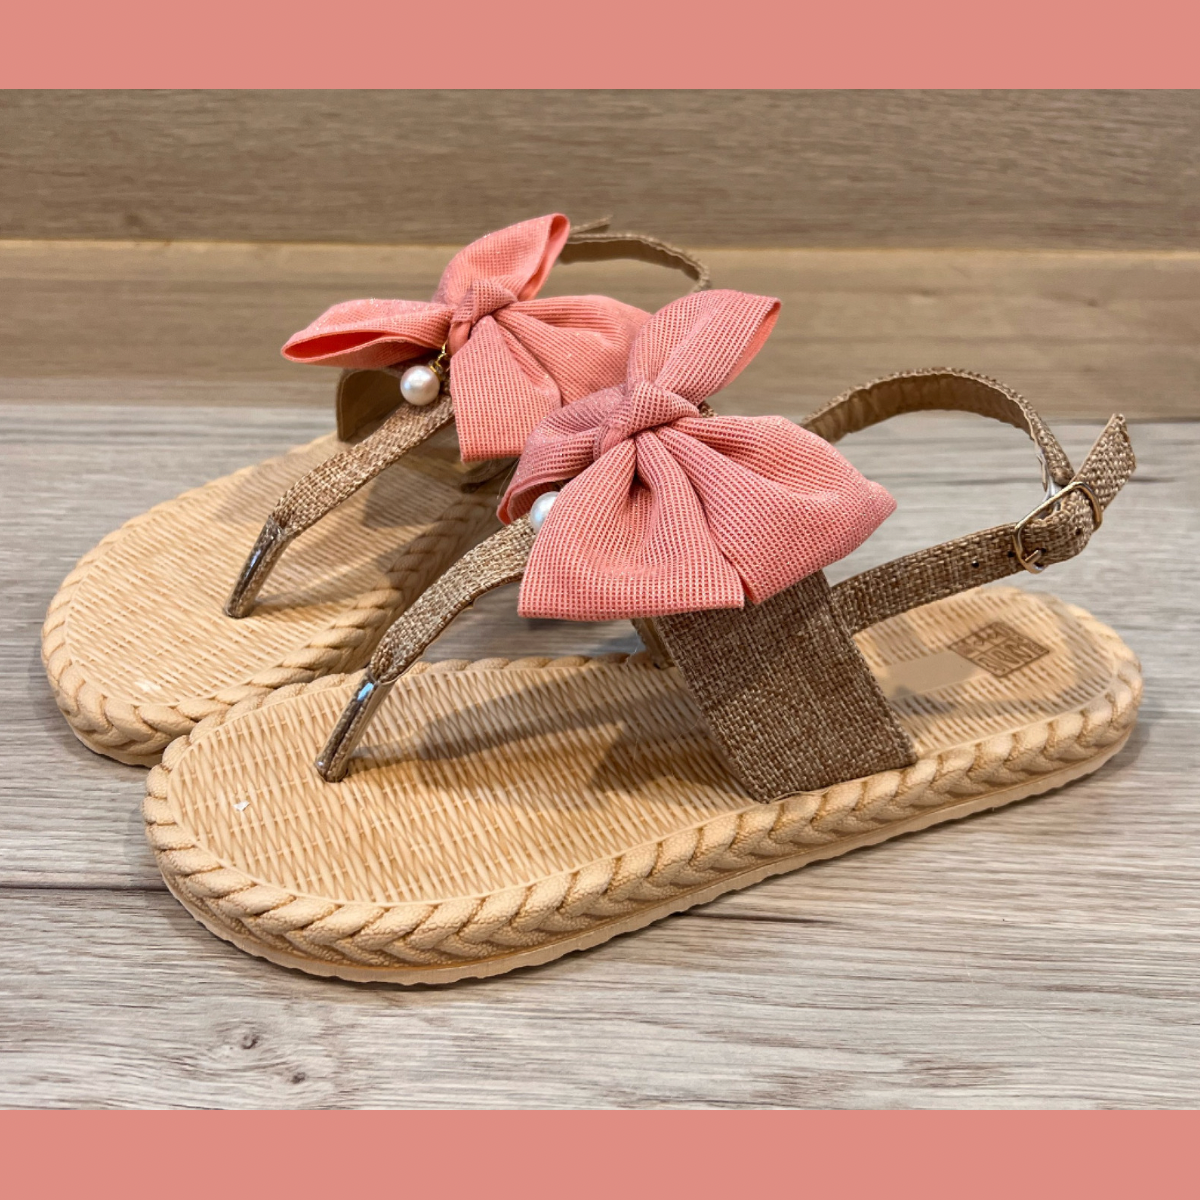 Printed sole flat sandals with large bow and pearl drop